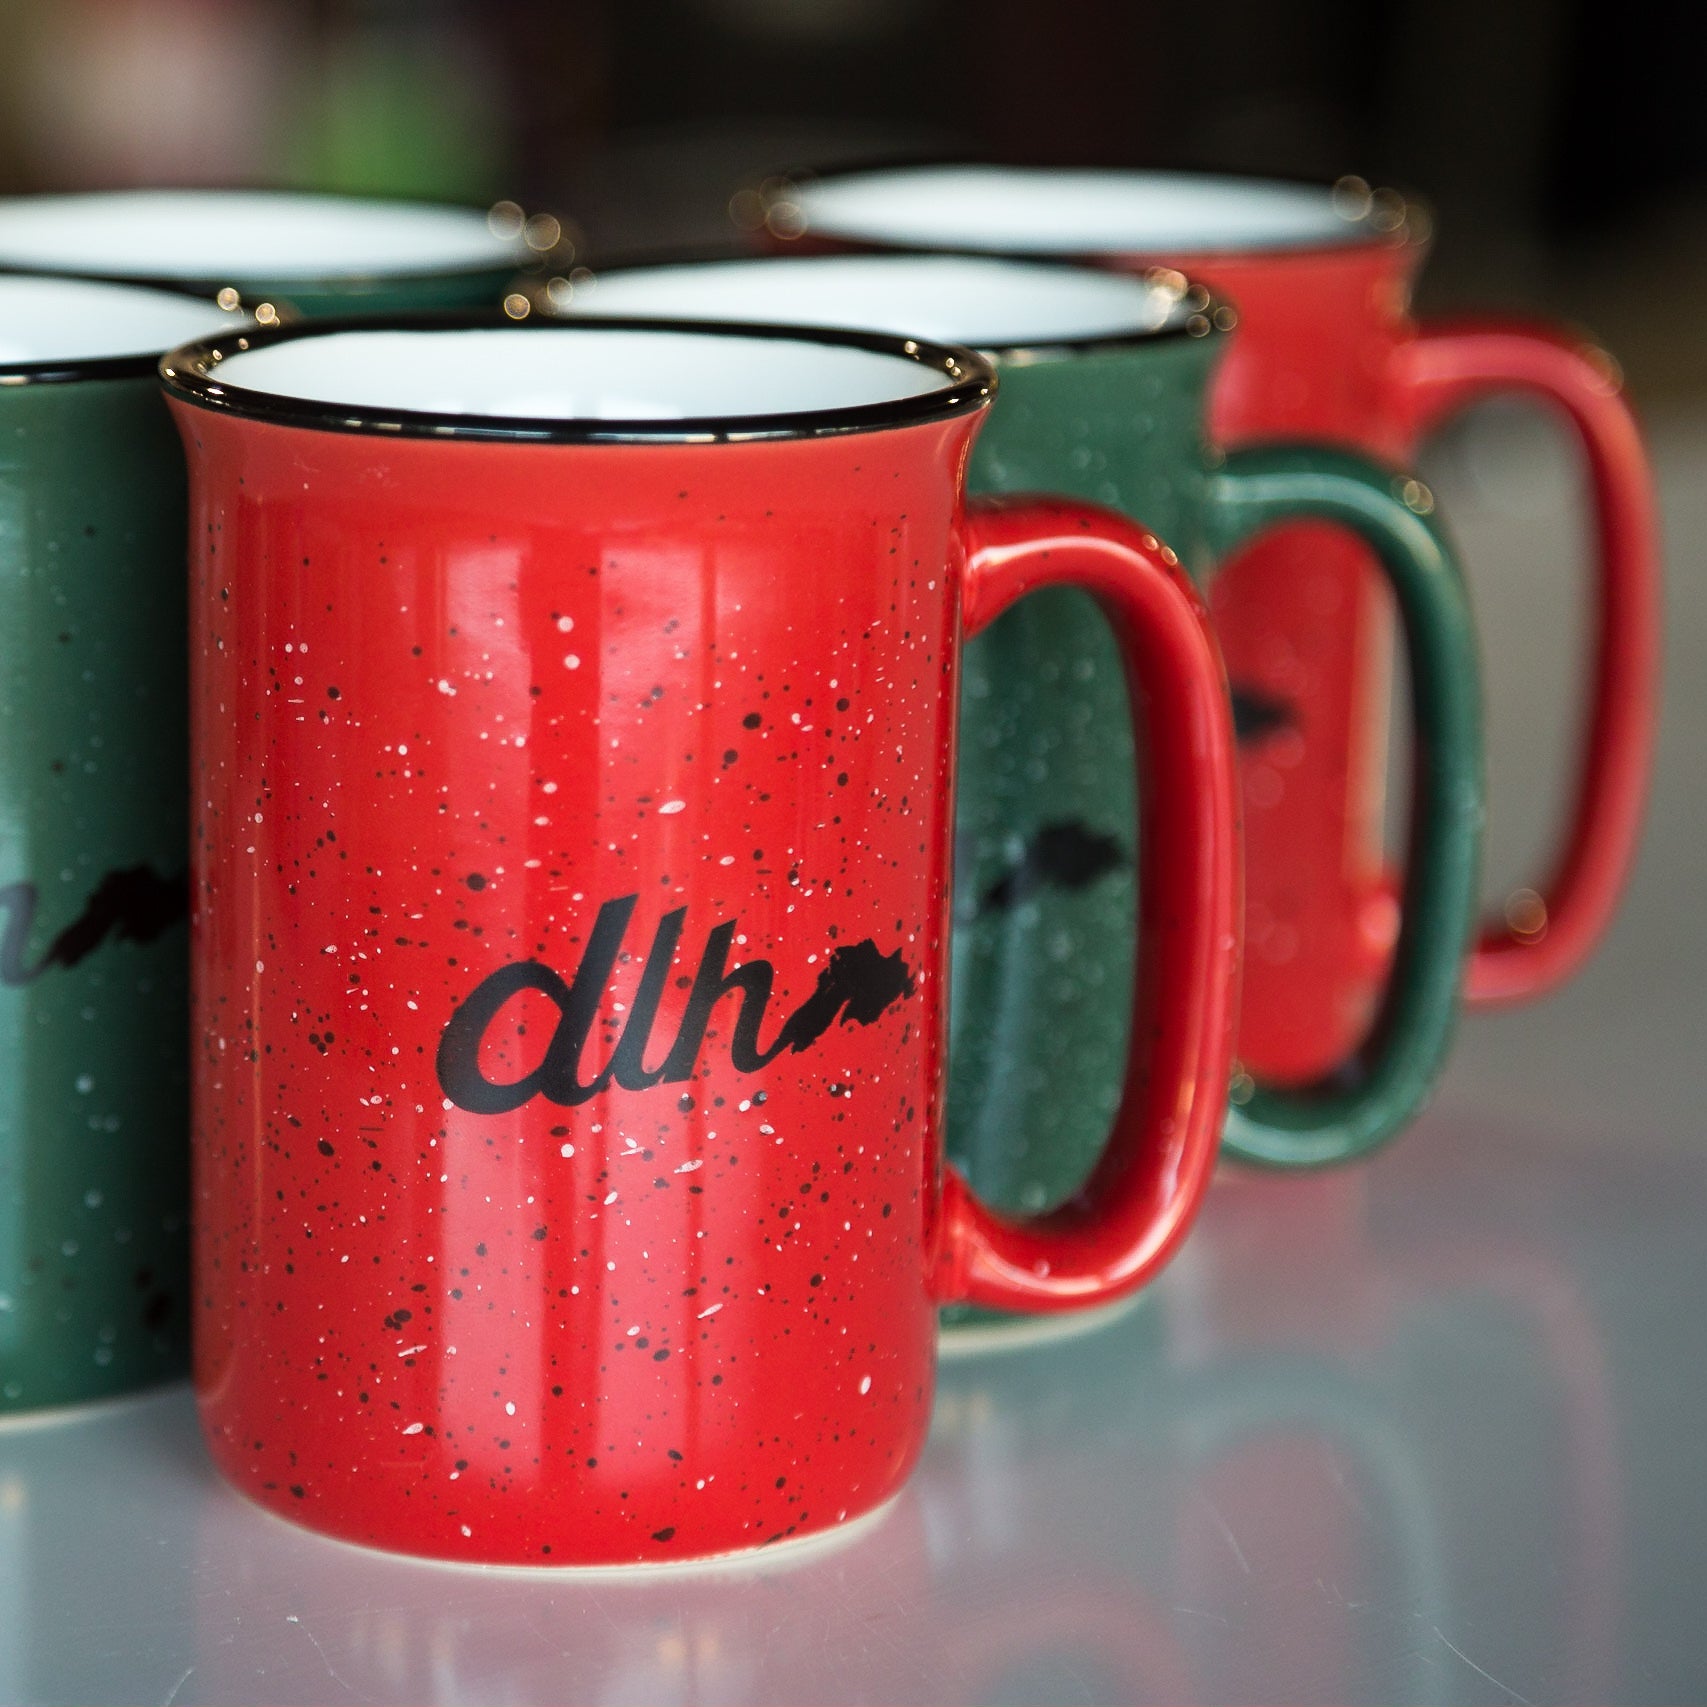 DLH branded holiday mugs.